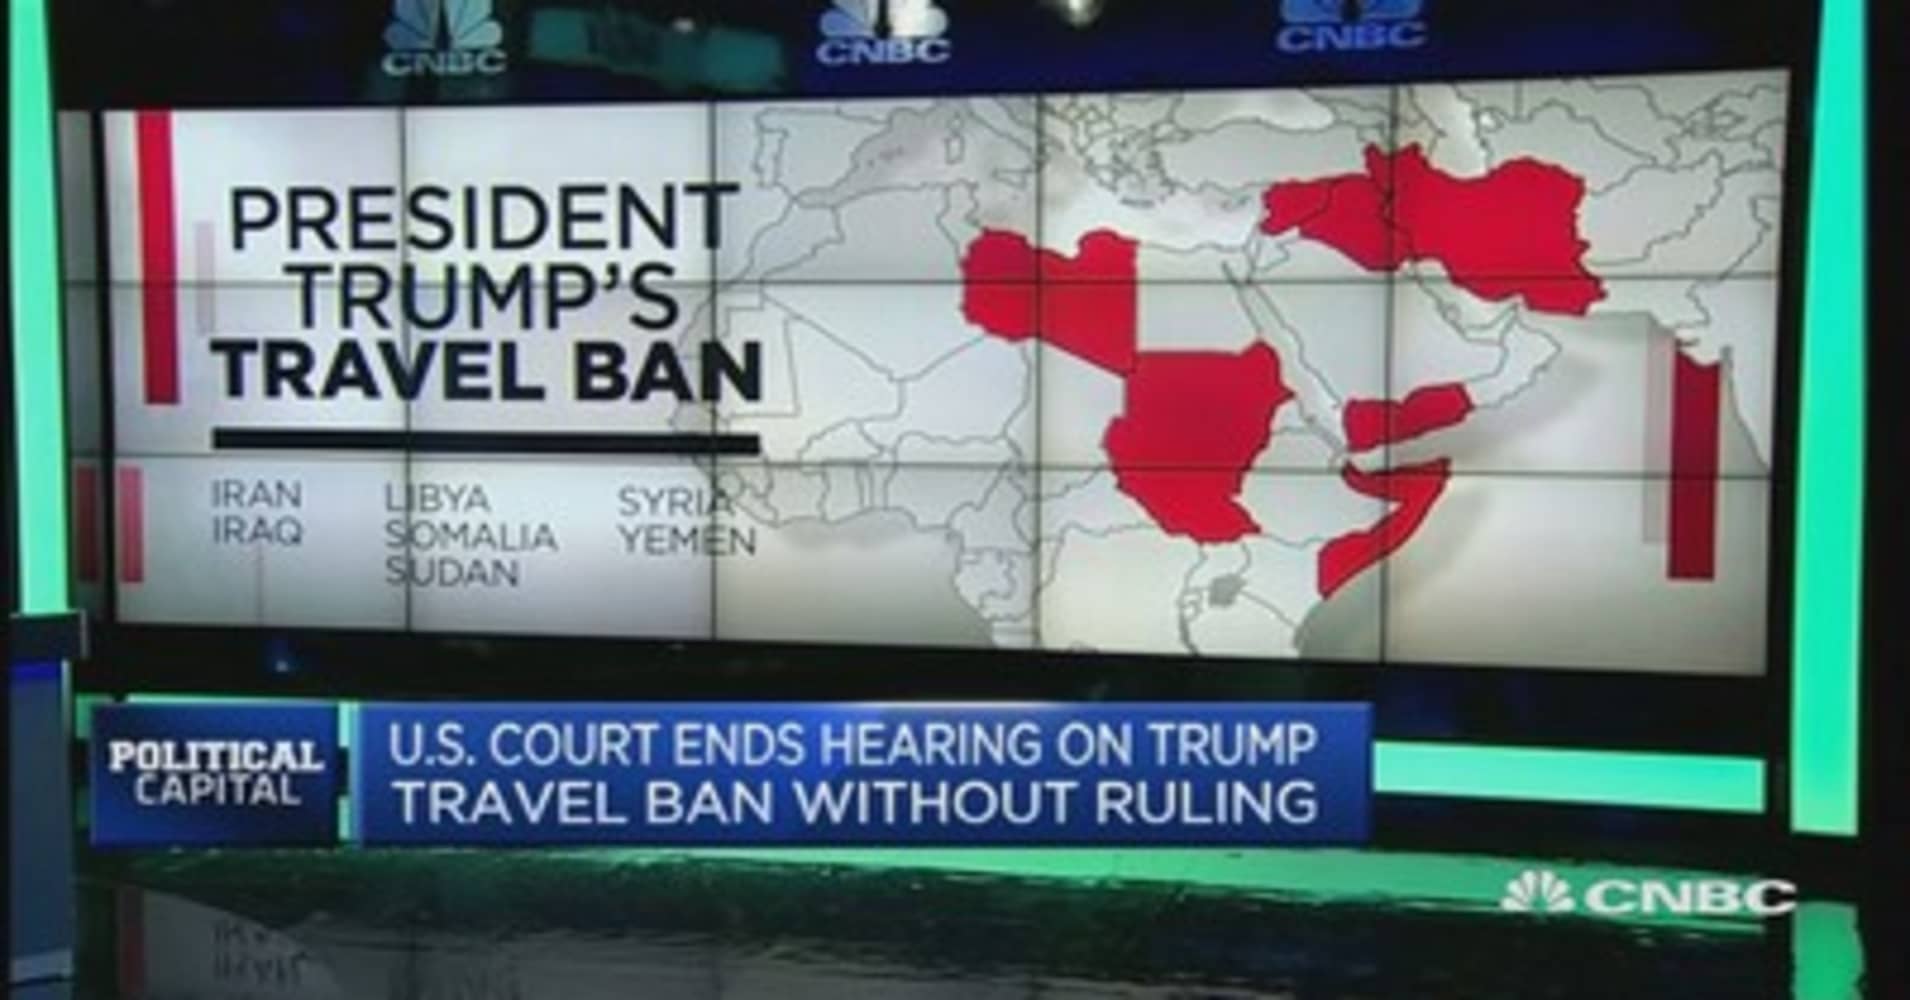 What's next for Trump's travel ban?